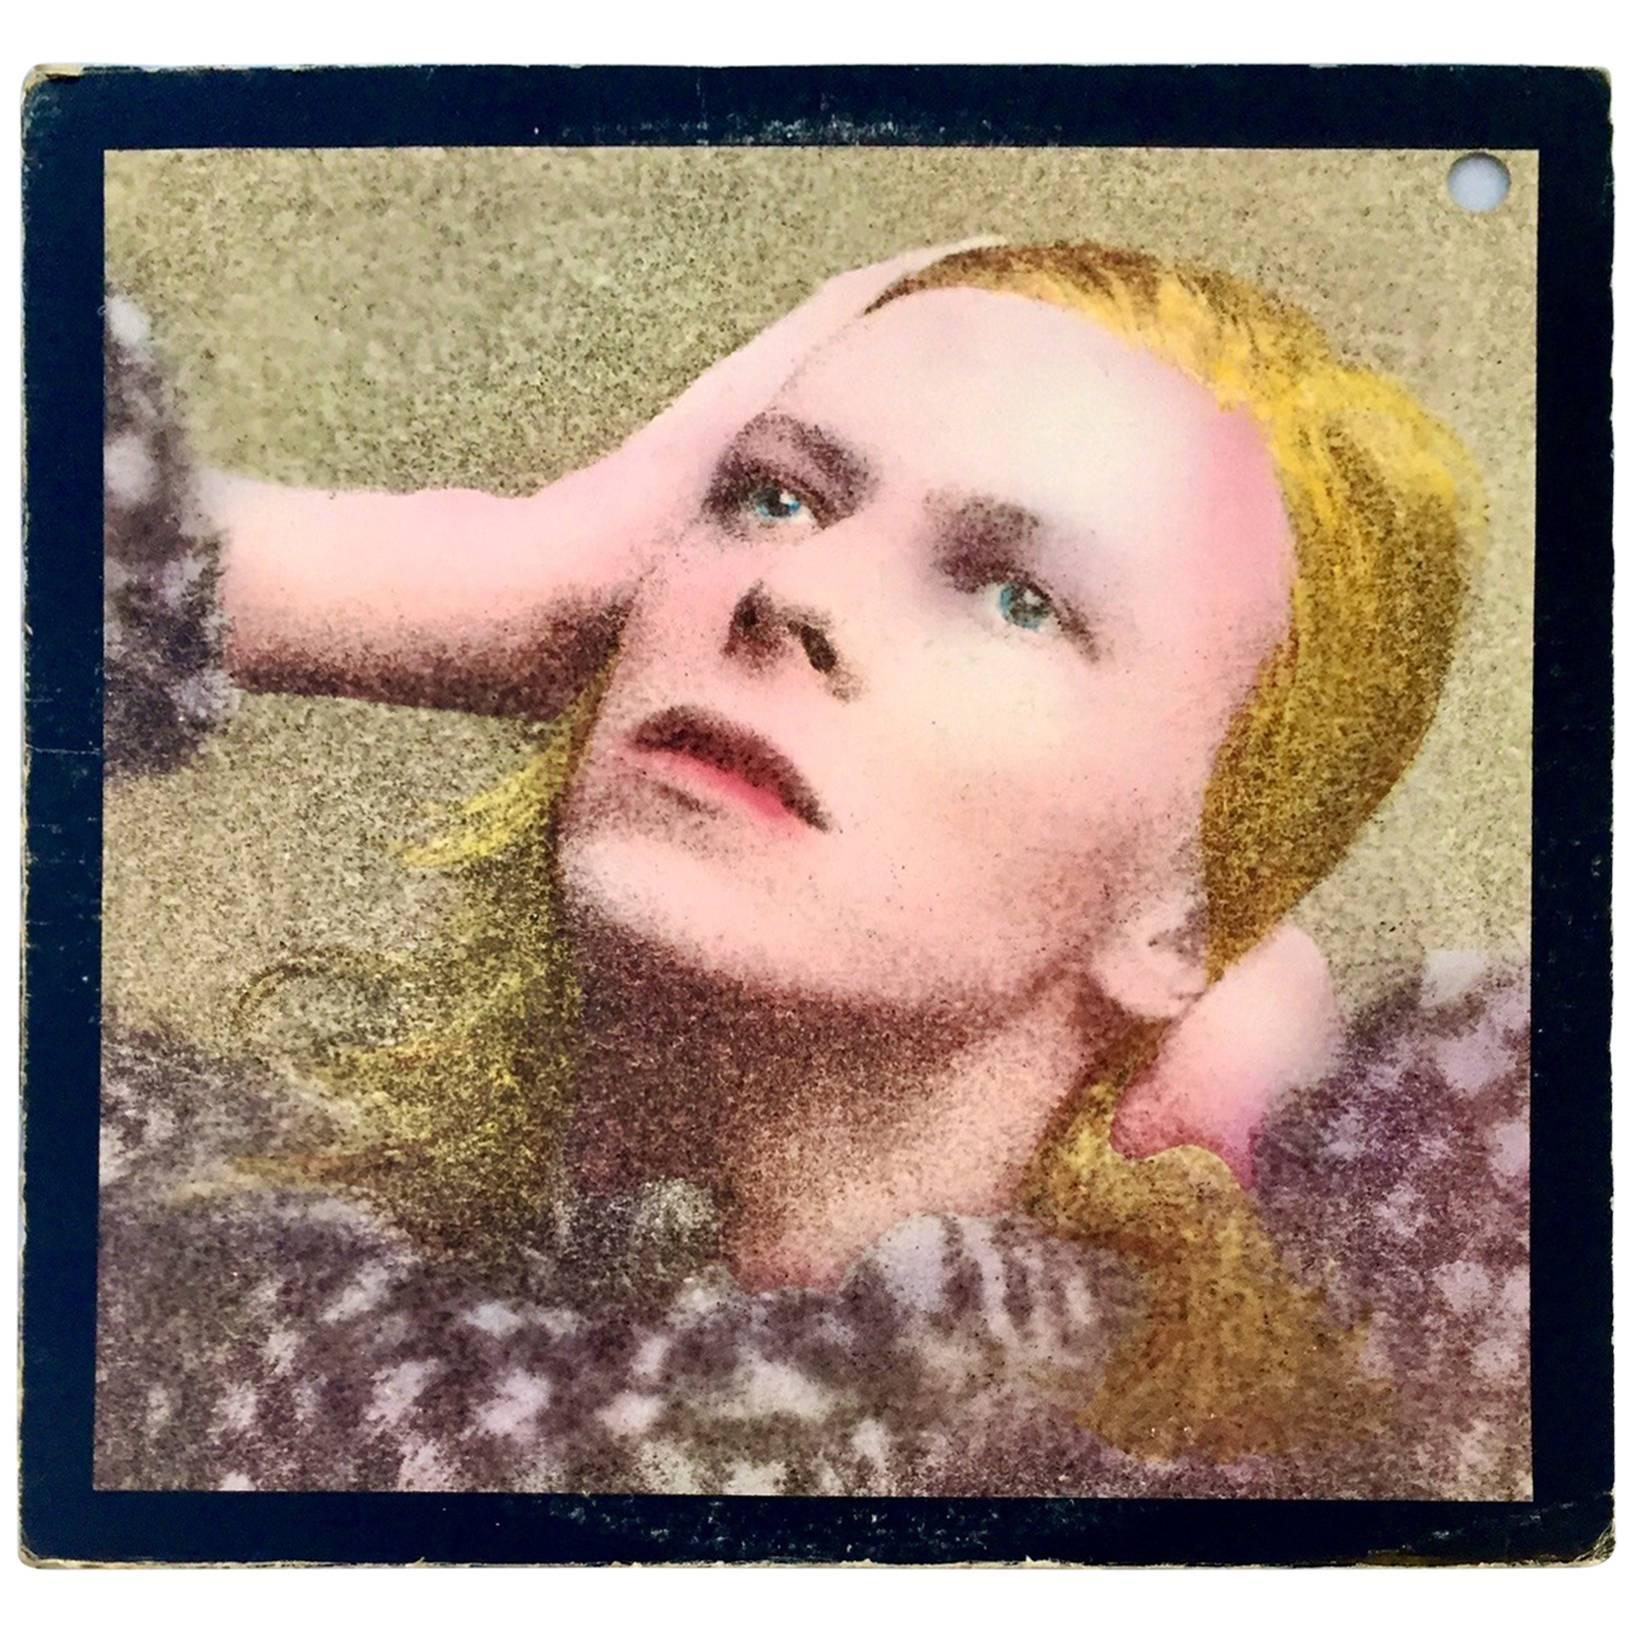 David Bowie Hunky Dory Vinyl Record Album First Pressing